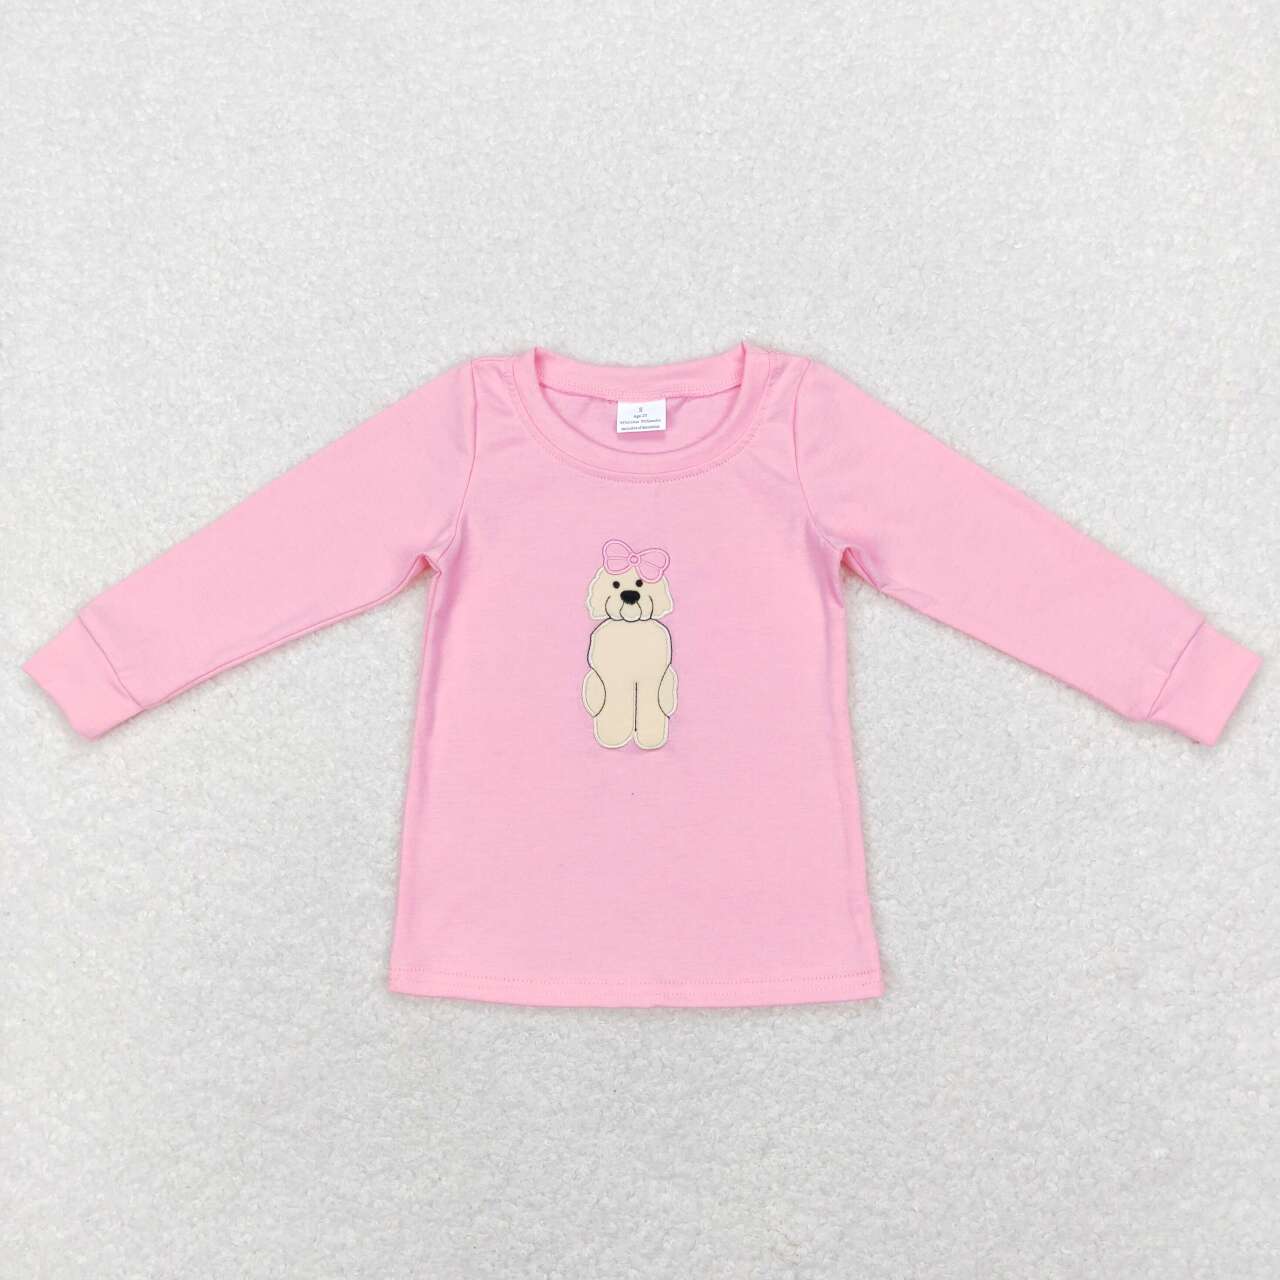 GT0408 baby boy girl clothes dog embroidery bow girl winter shirt top